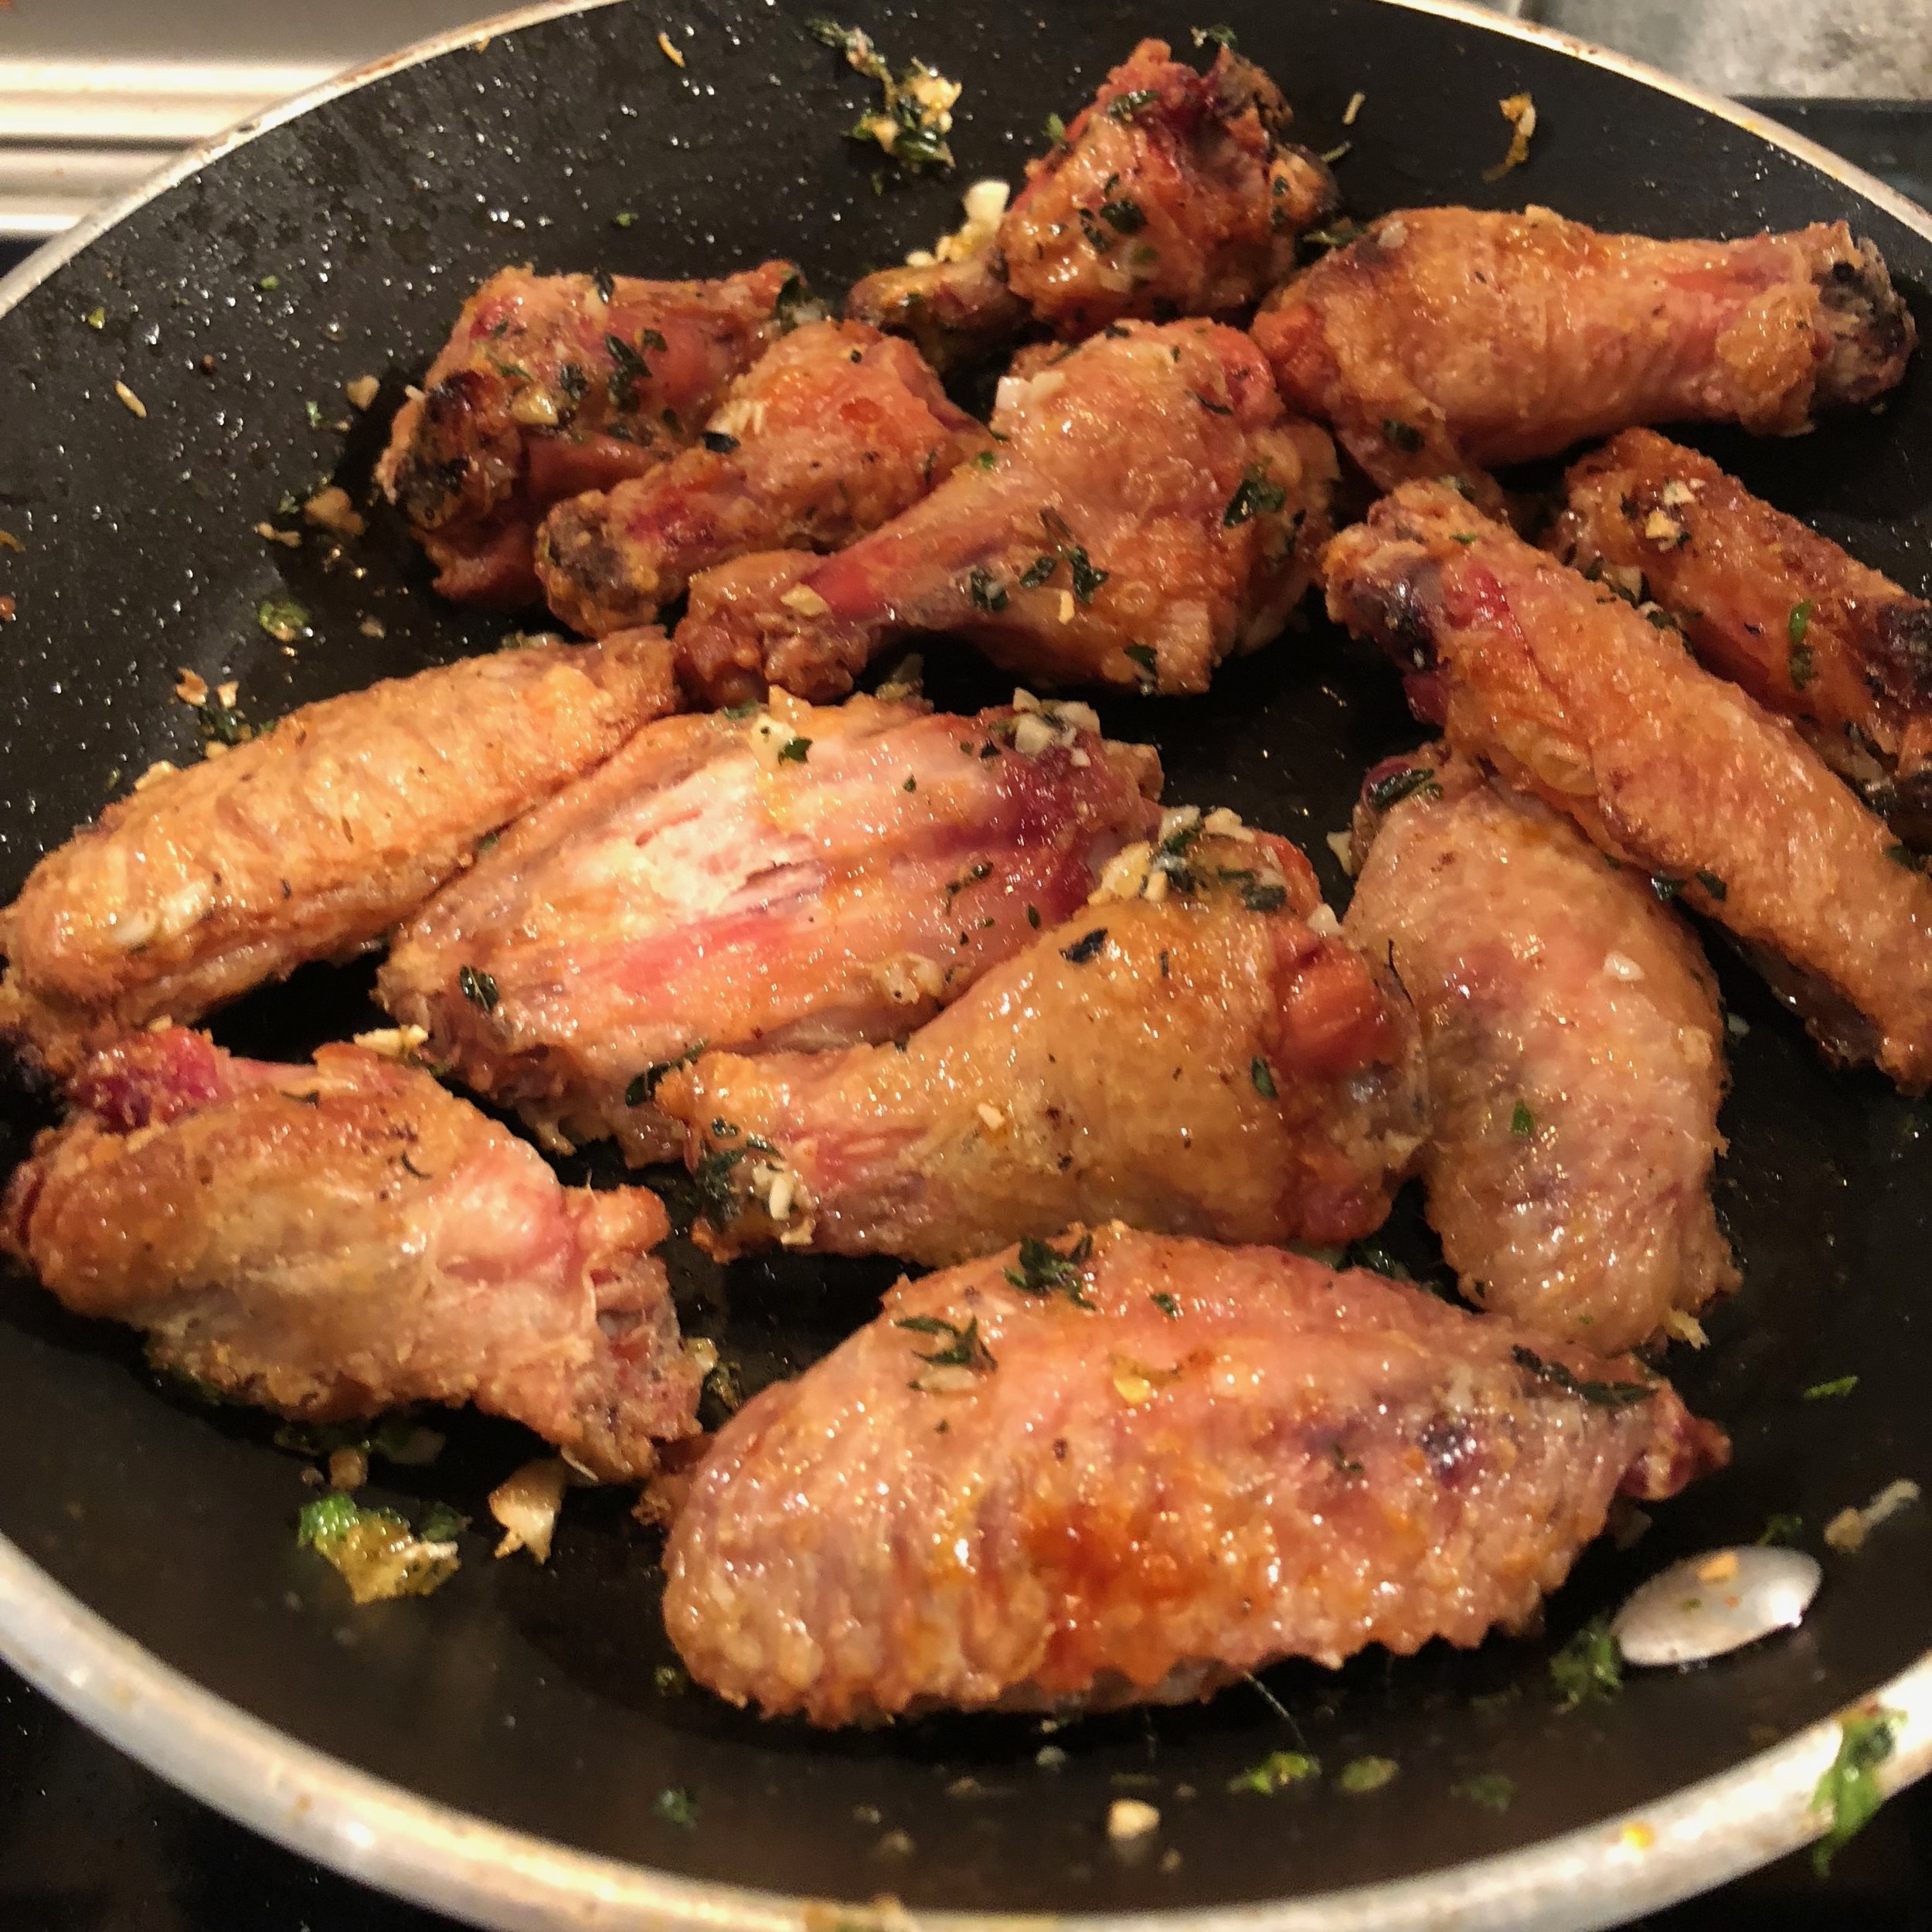 Add the chicken wings